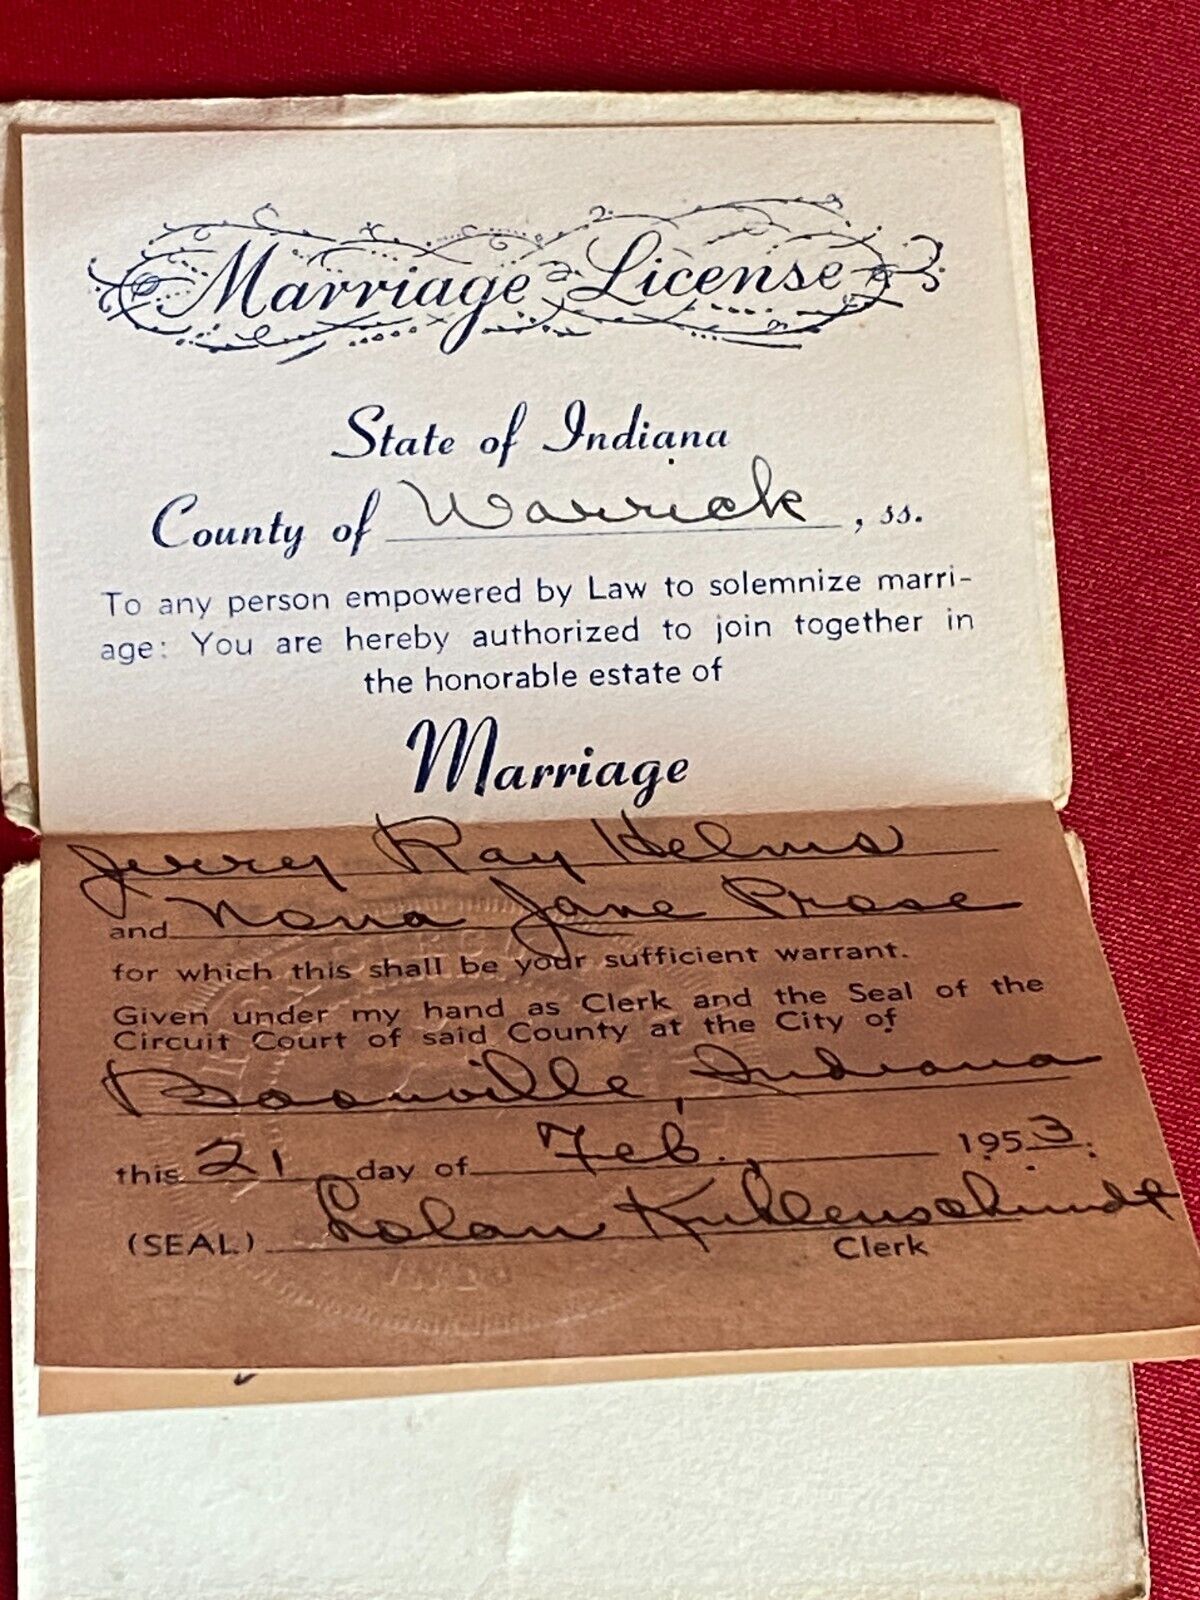 1953 Marriage License Card Warrick County Indiana Boonville